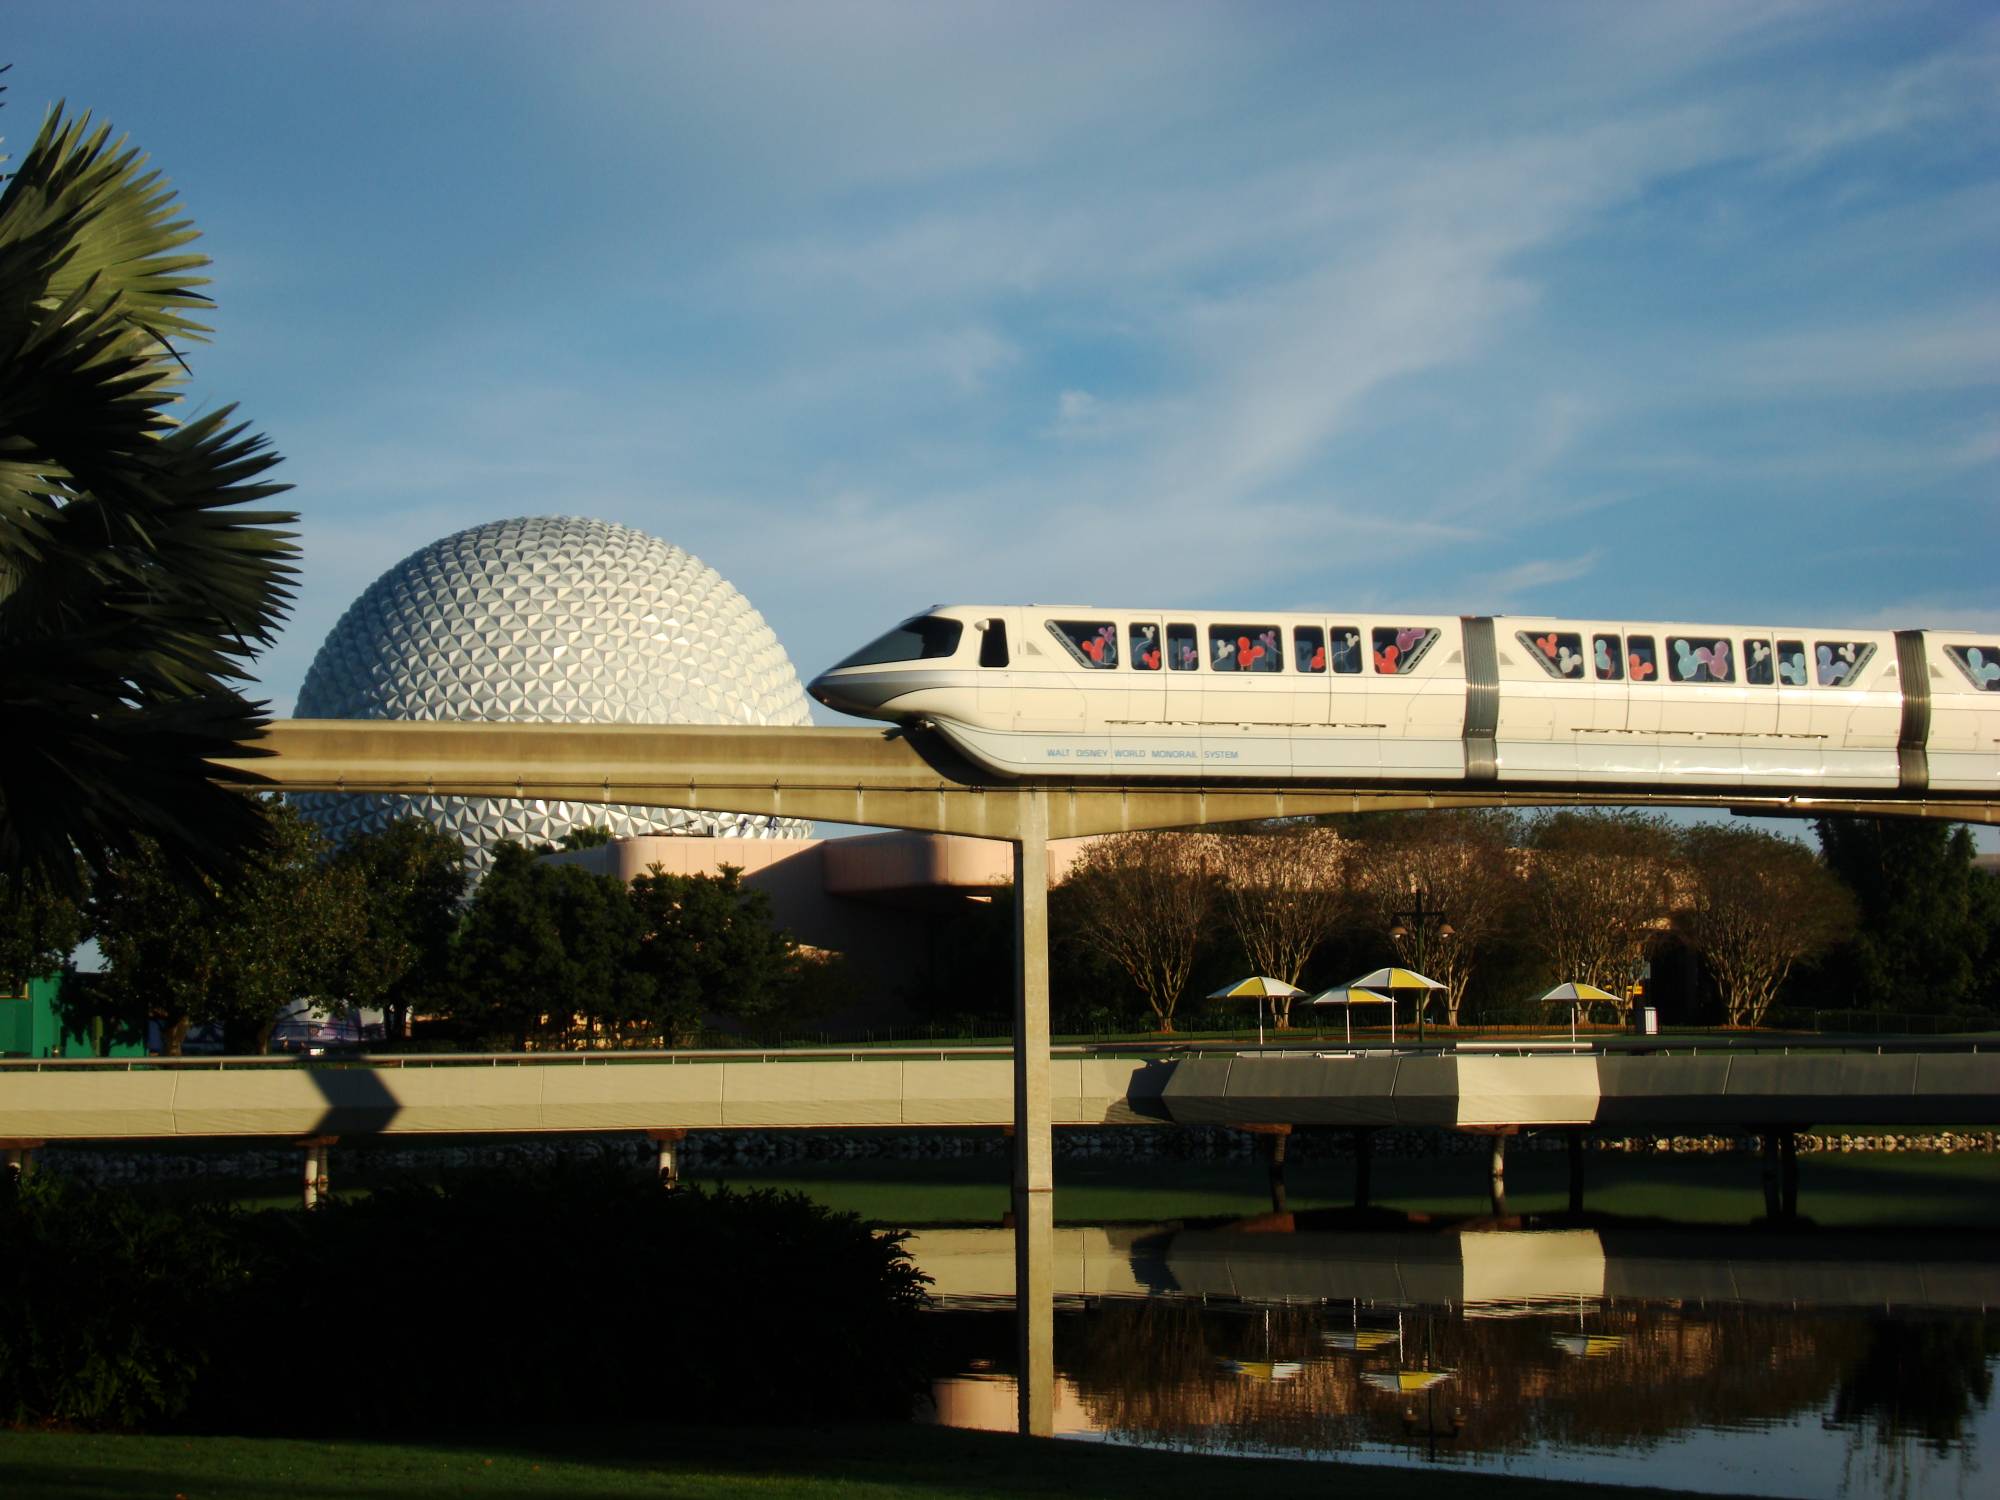 Epcot - Spaceship Earth and monorail